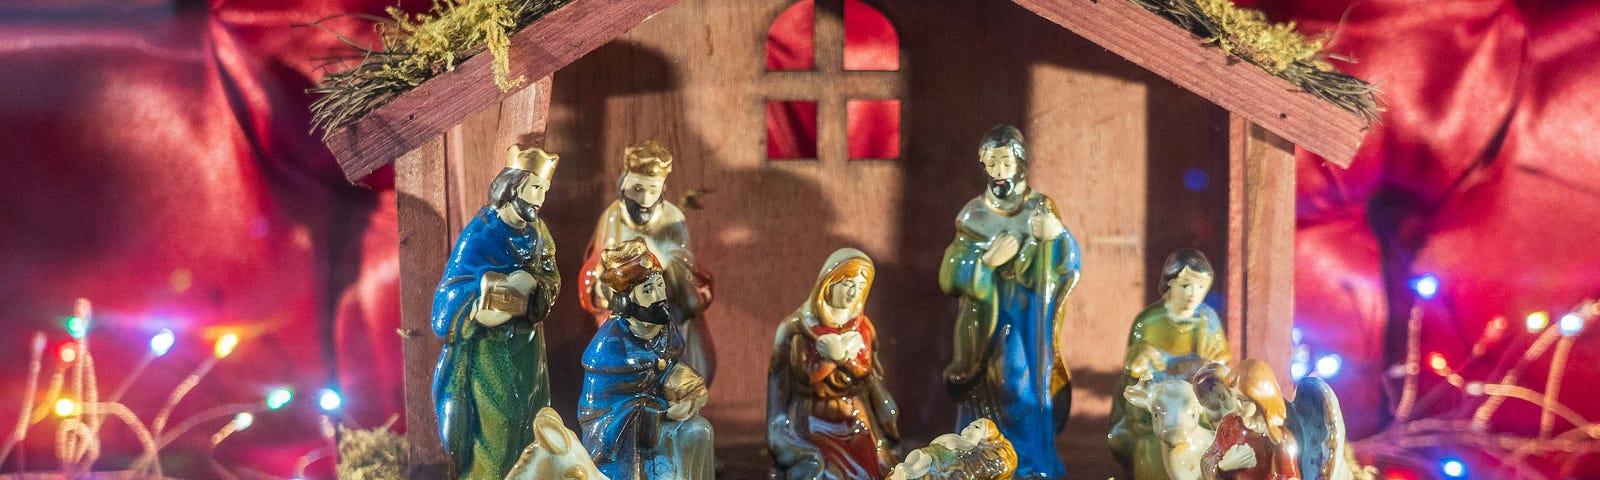 This shows a manger with lights in front of a red background.